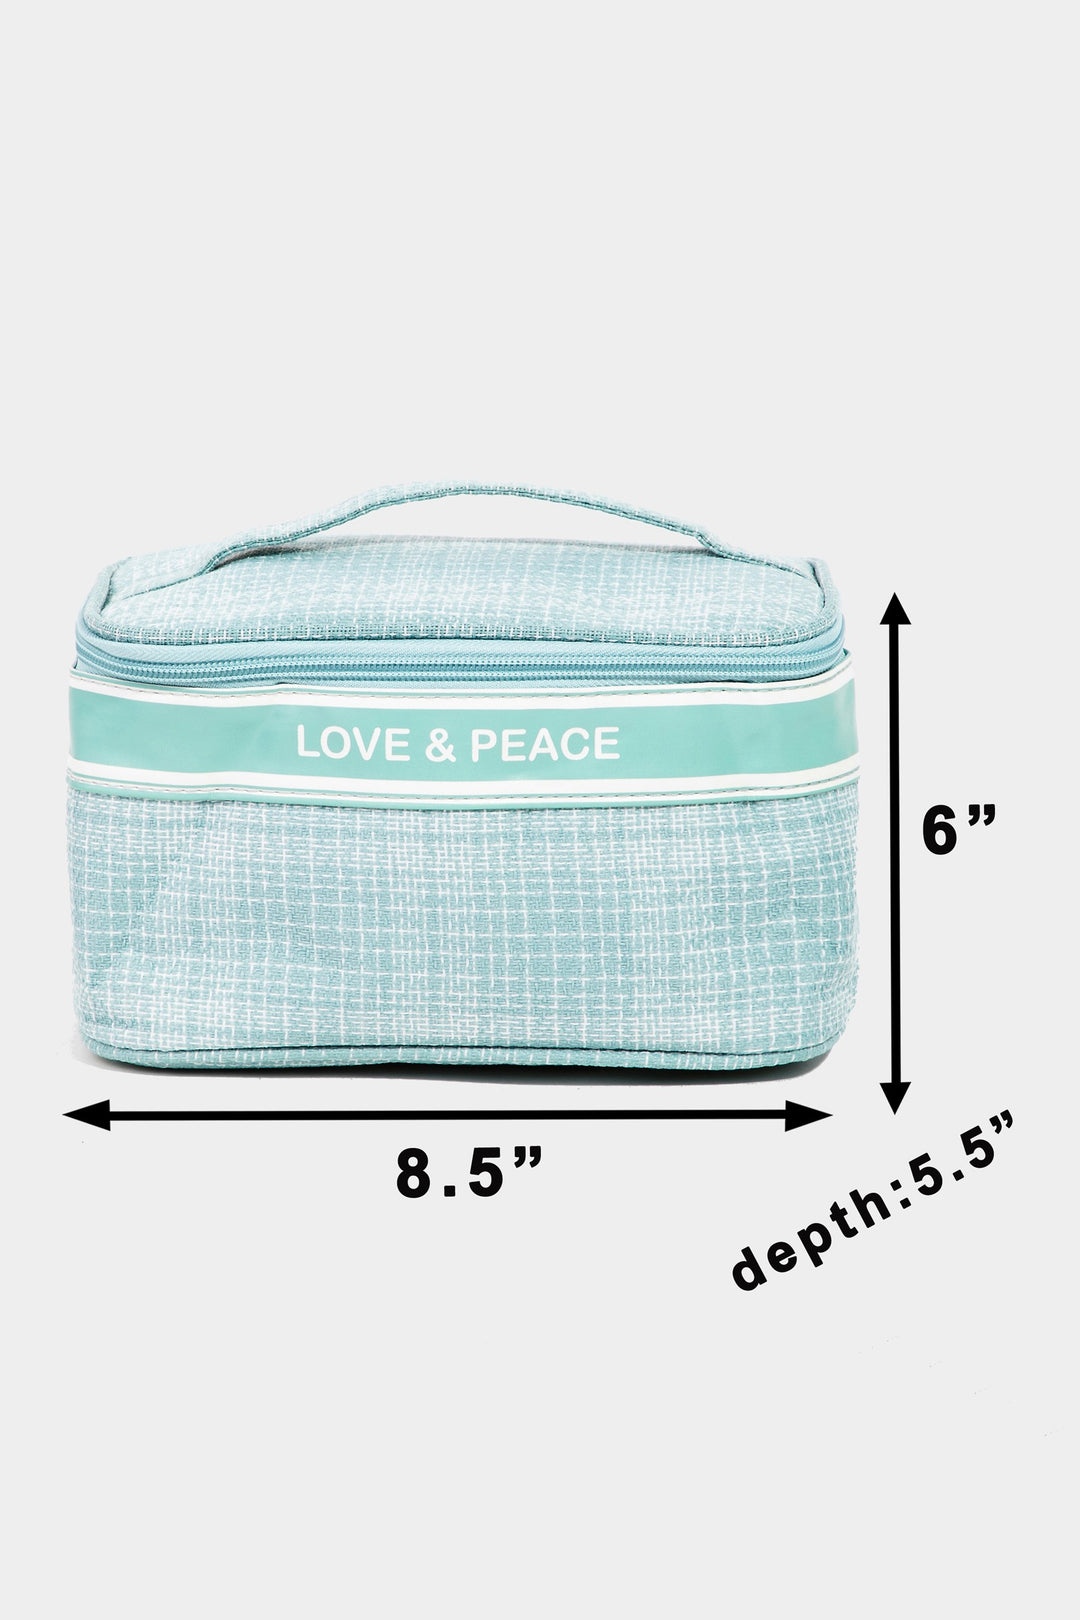 Fame Love & Peace Striped Cosmetic Bag